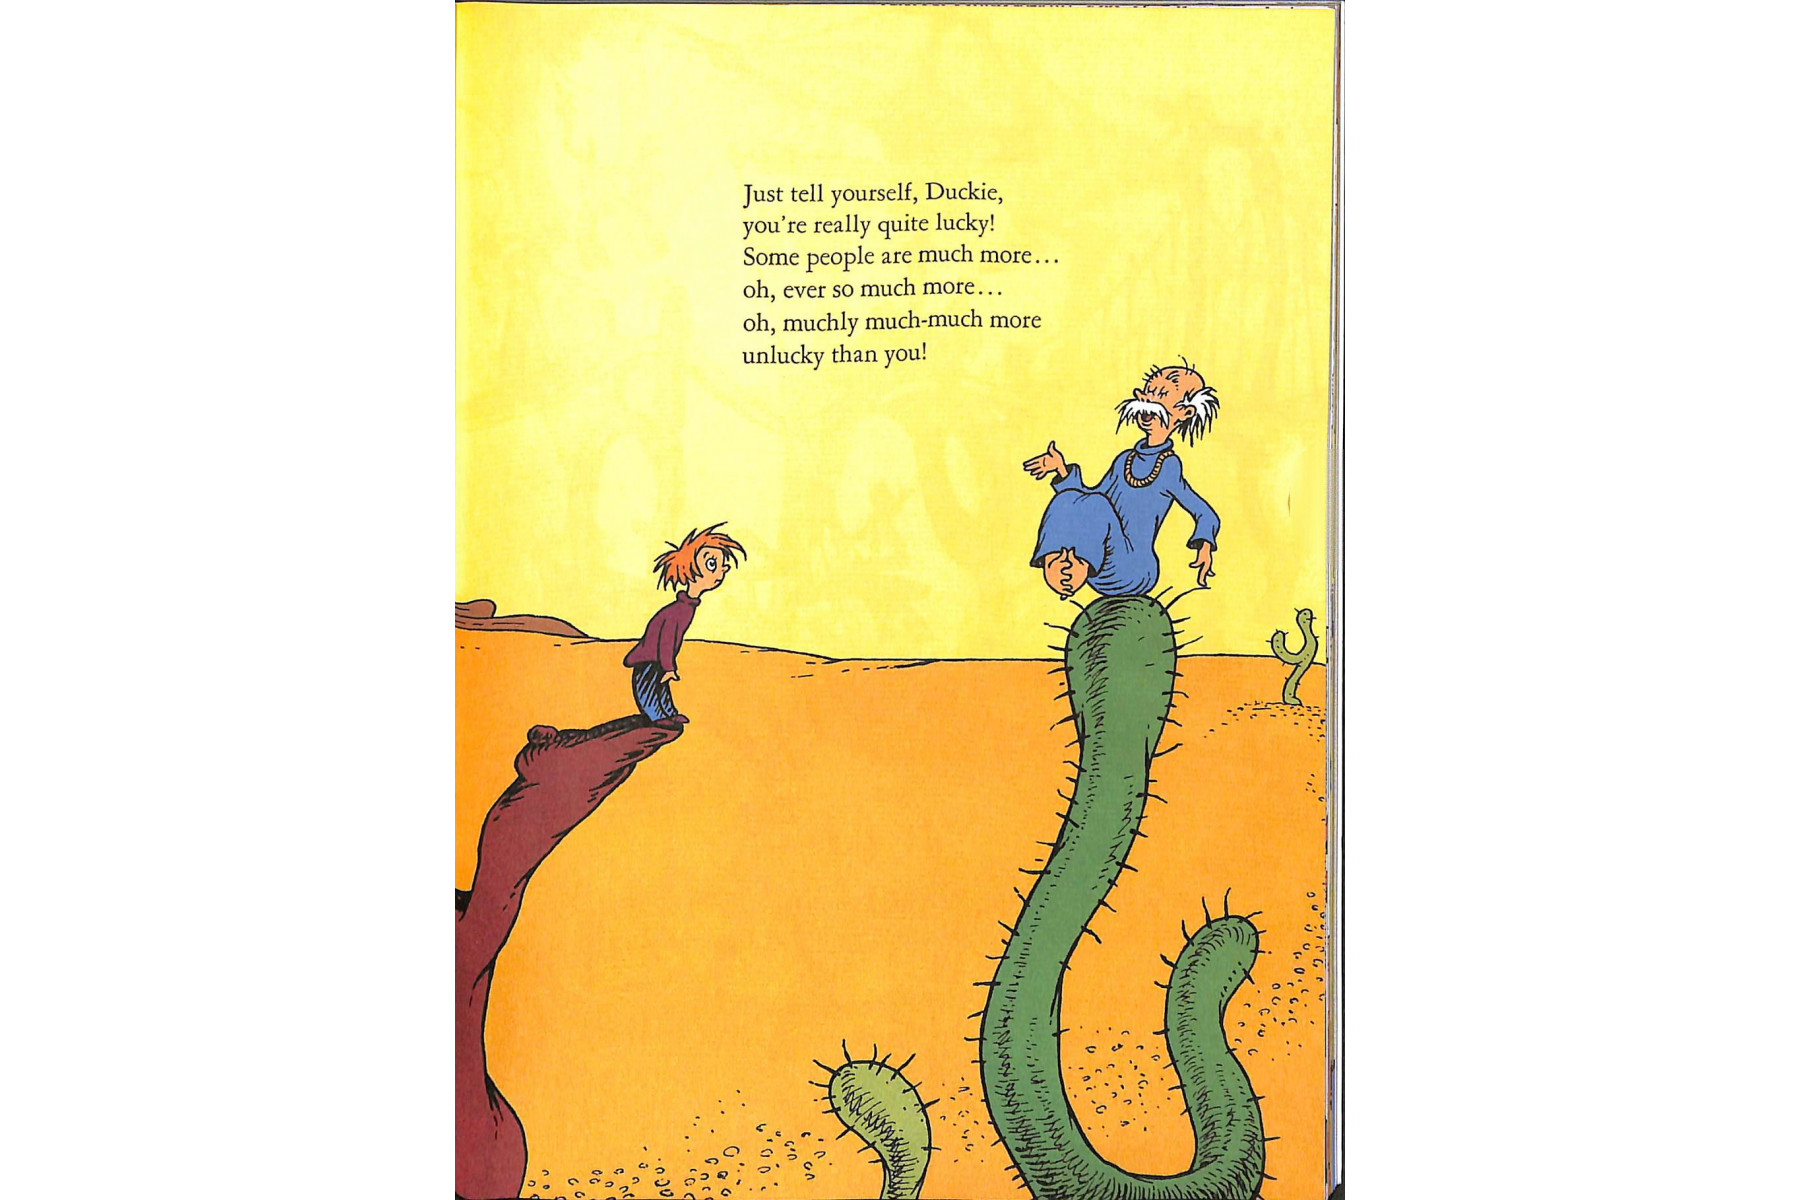 Did I Ever Tell You How Lucky You Are? (Dr. Seuss Yellow Back Book)